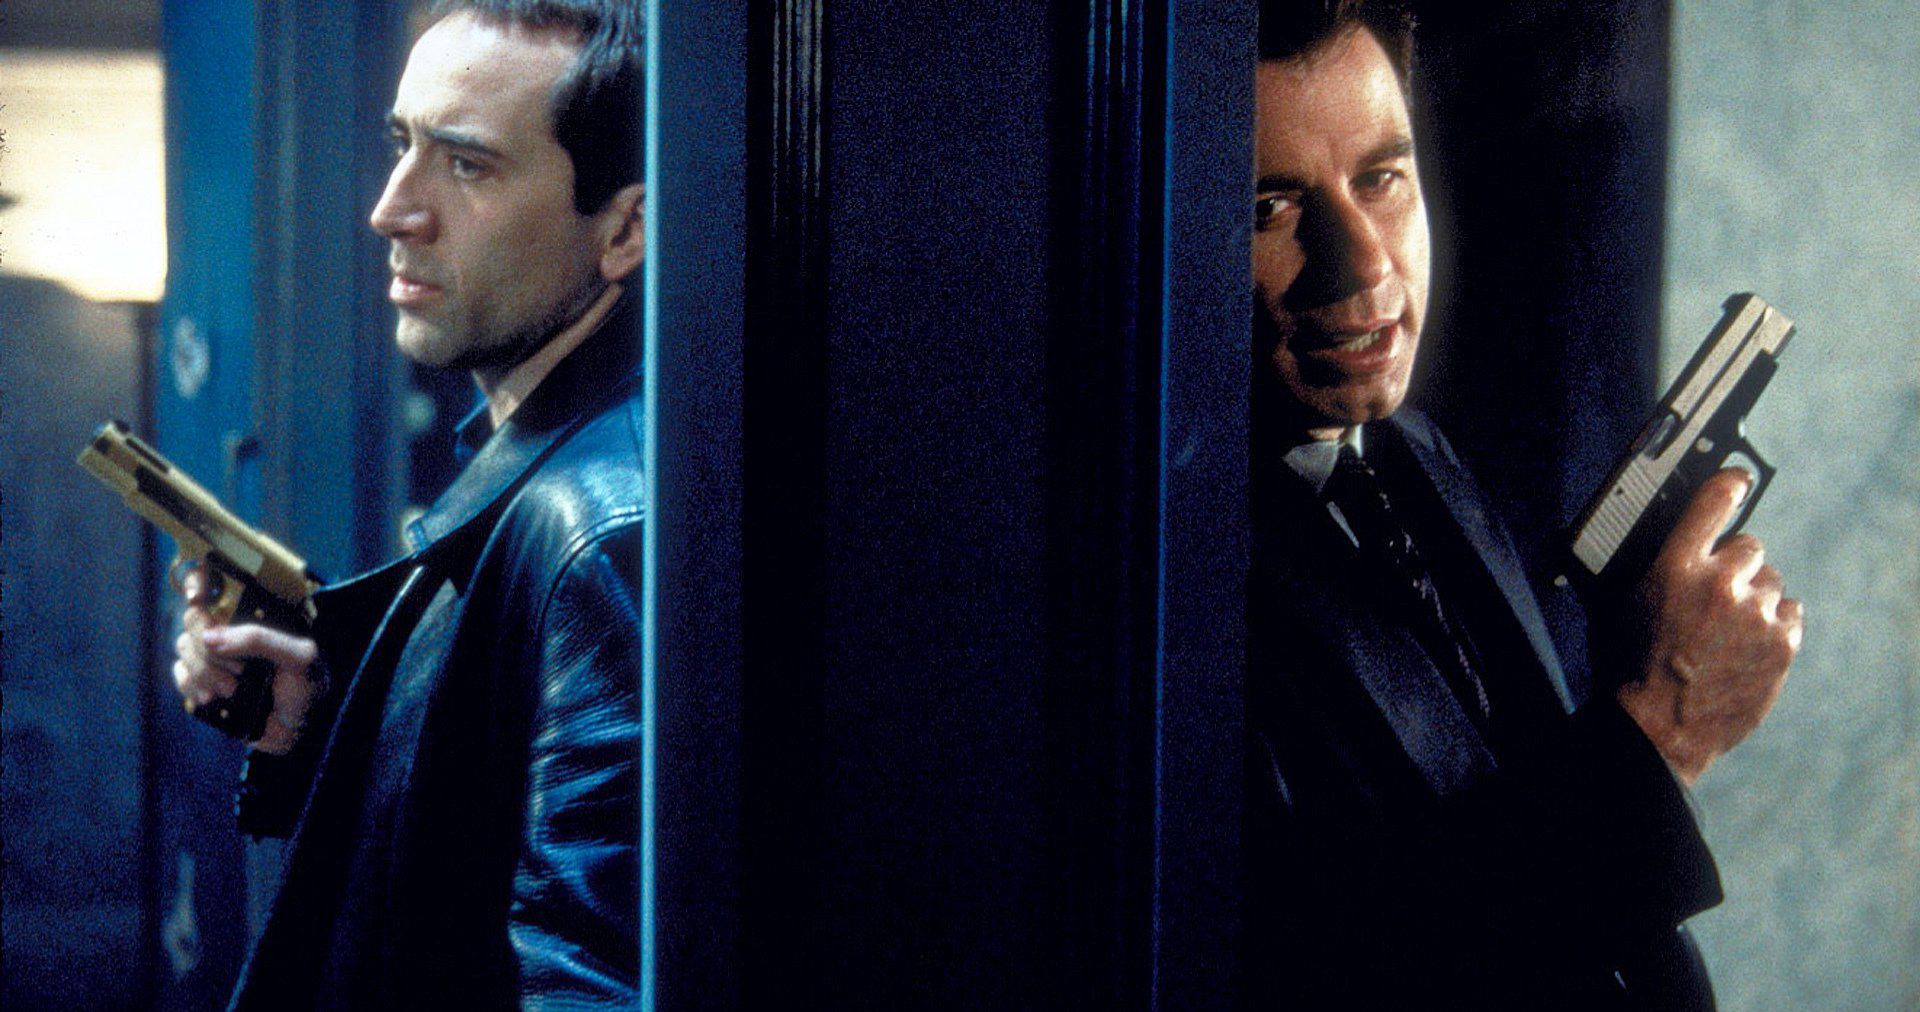 Face/Off 2 Script Is Almost Finished, Director Is Determined to Make the Definitive Follow-Up